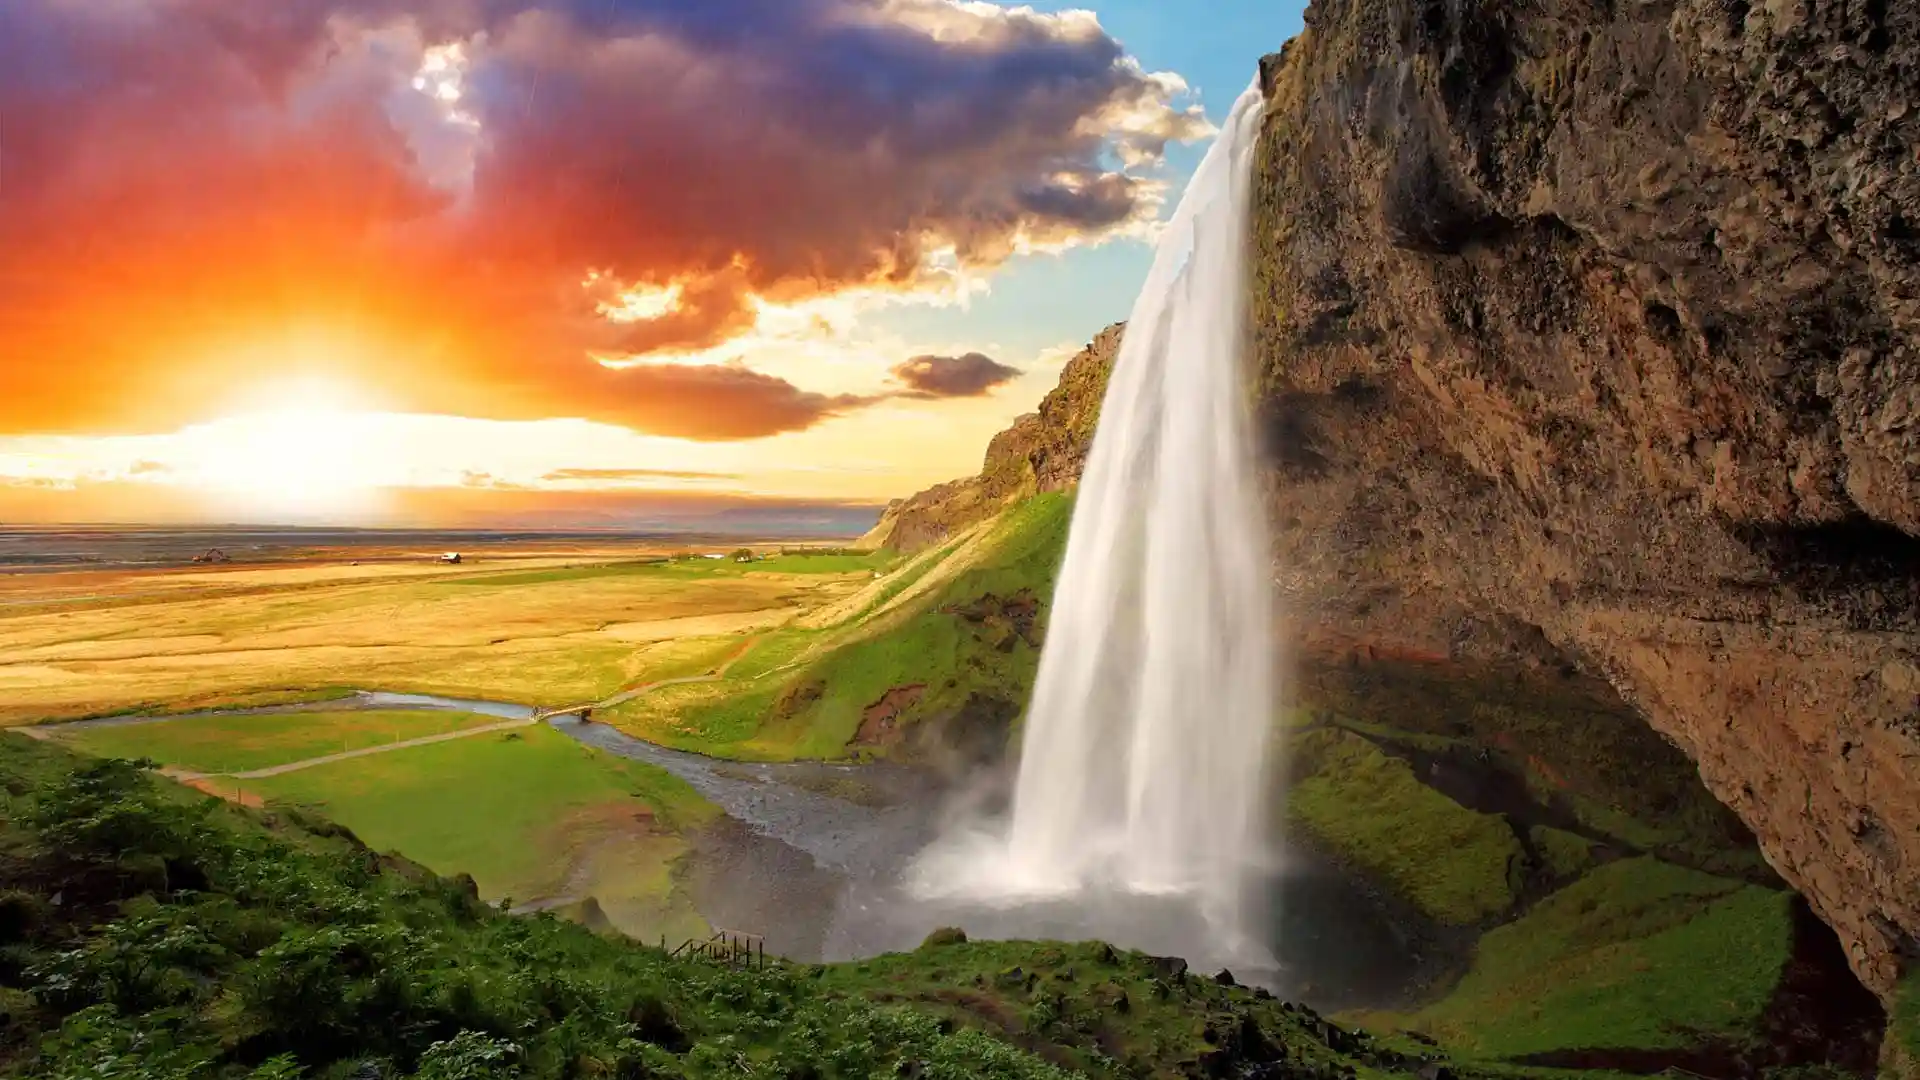 Iceland waterfall during sunrise or sunset accenting the lush landscape.